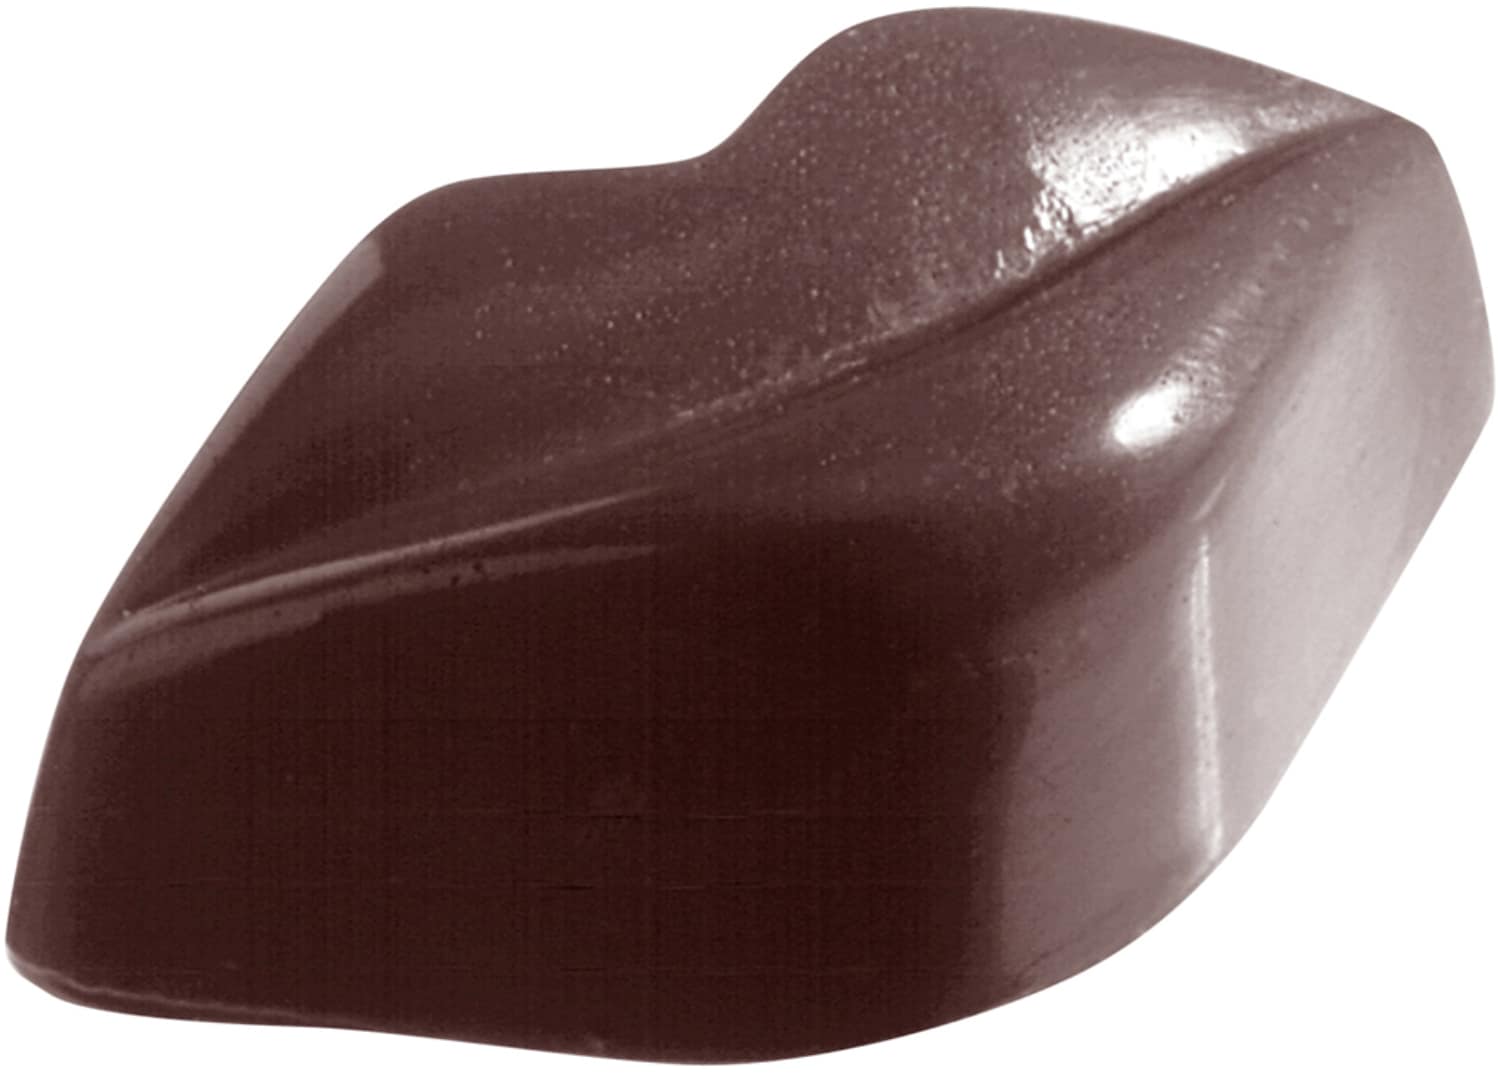 Chocolate mould "Mouth" 421296 421296